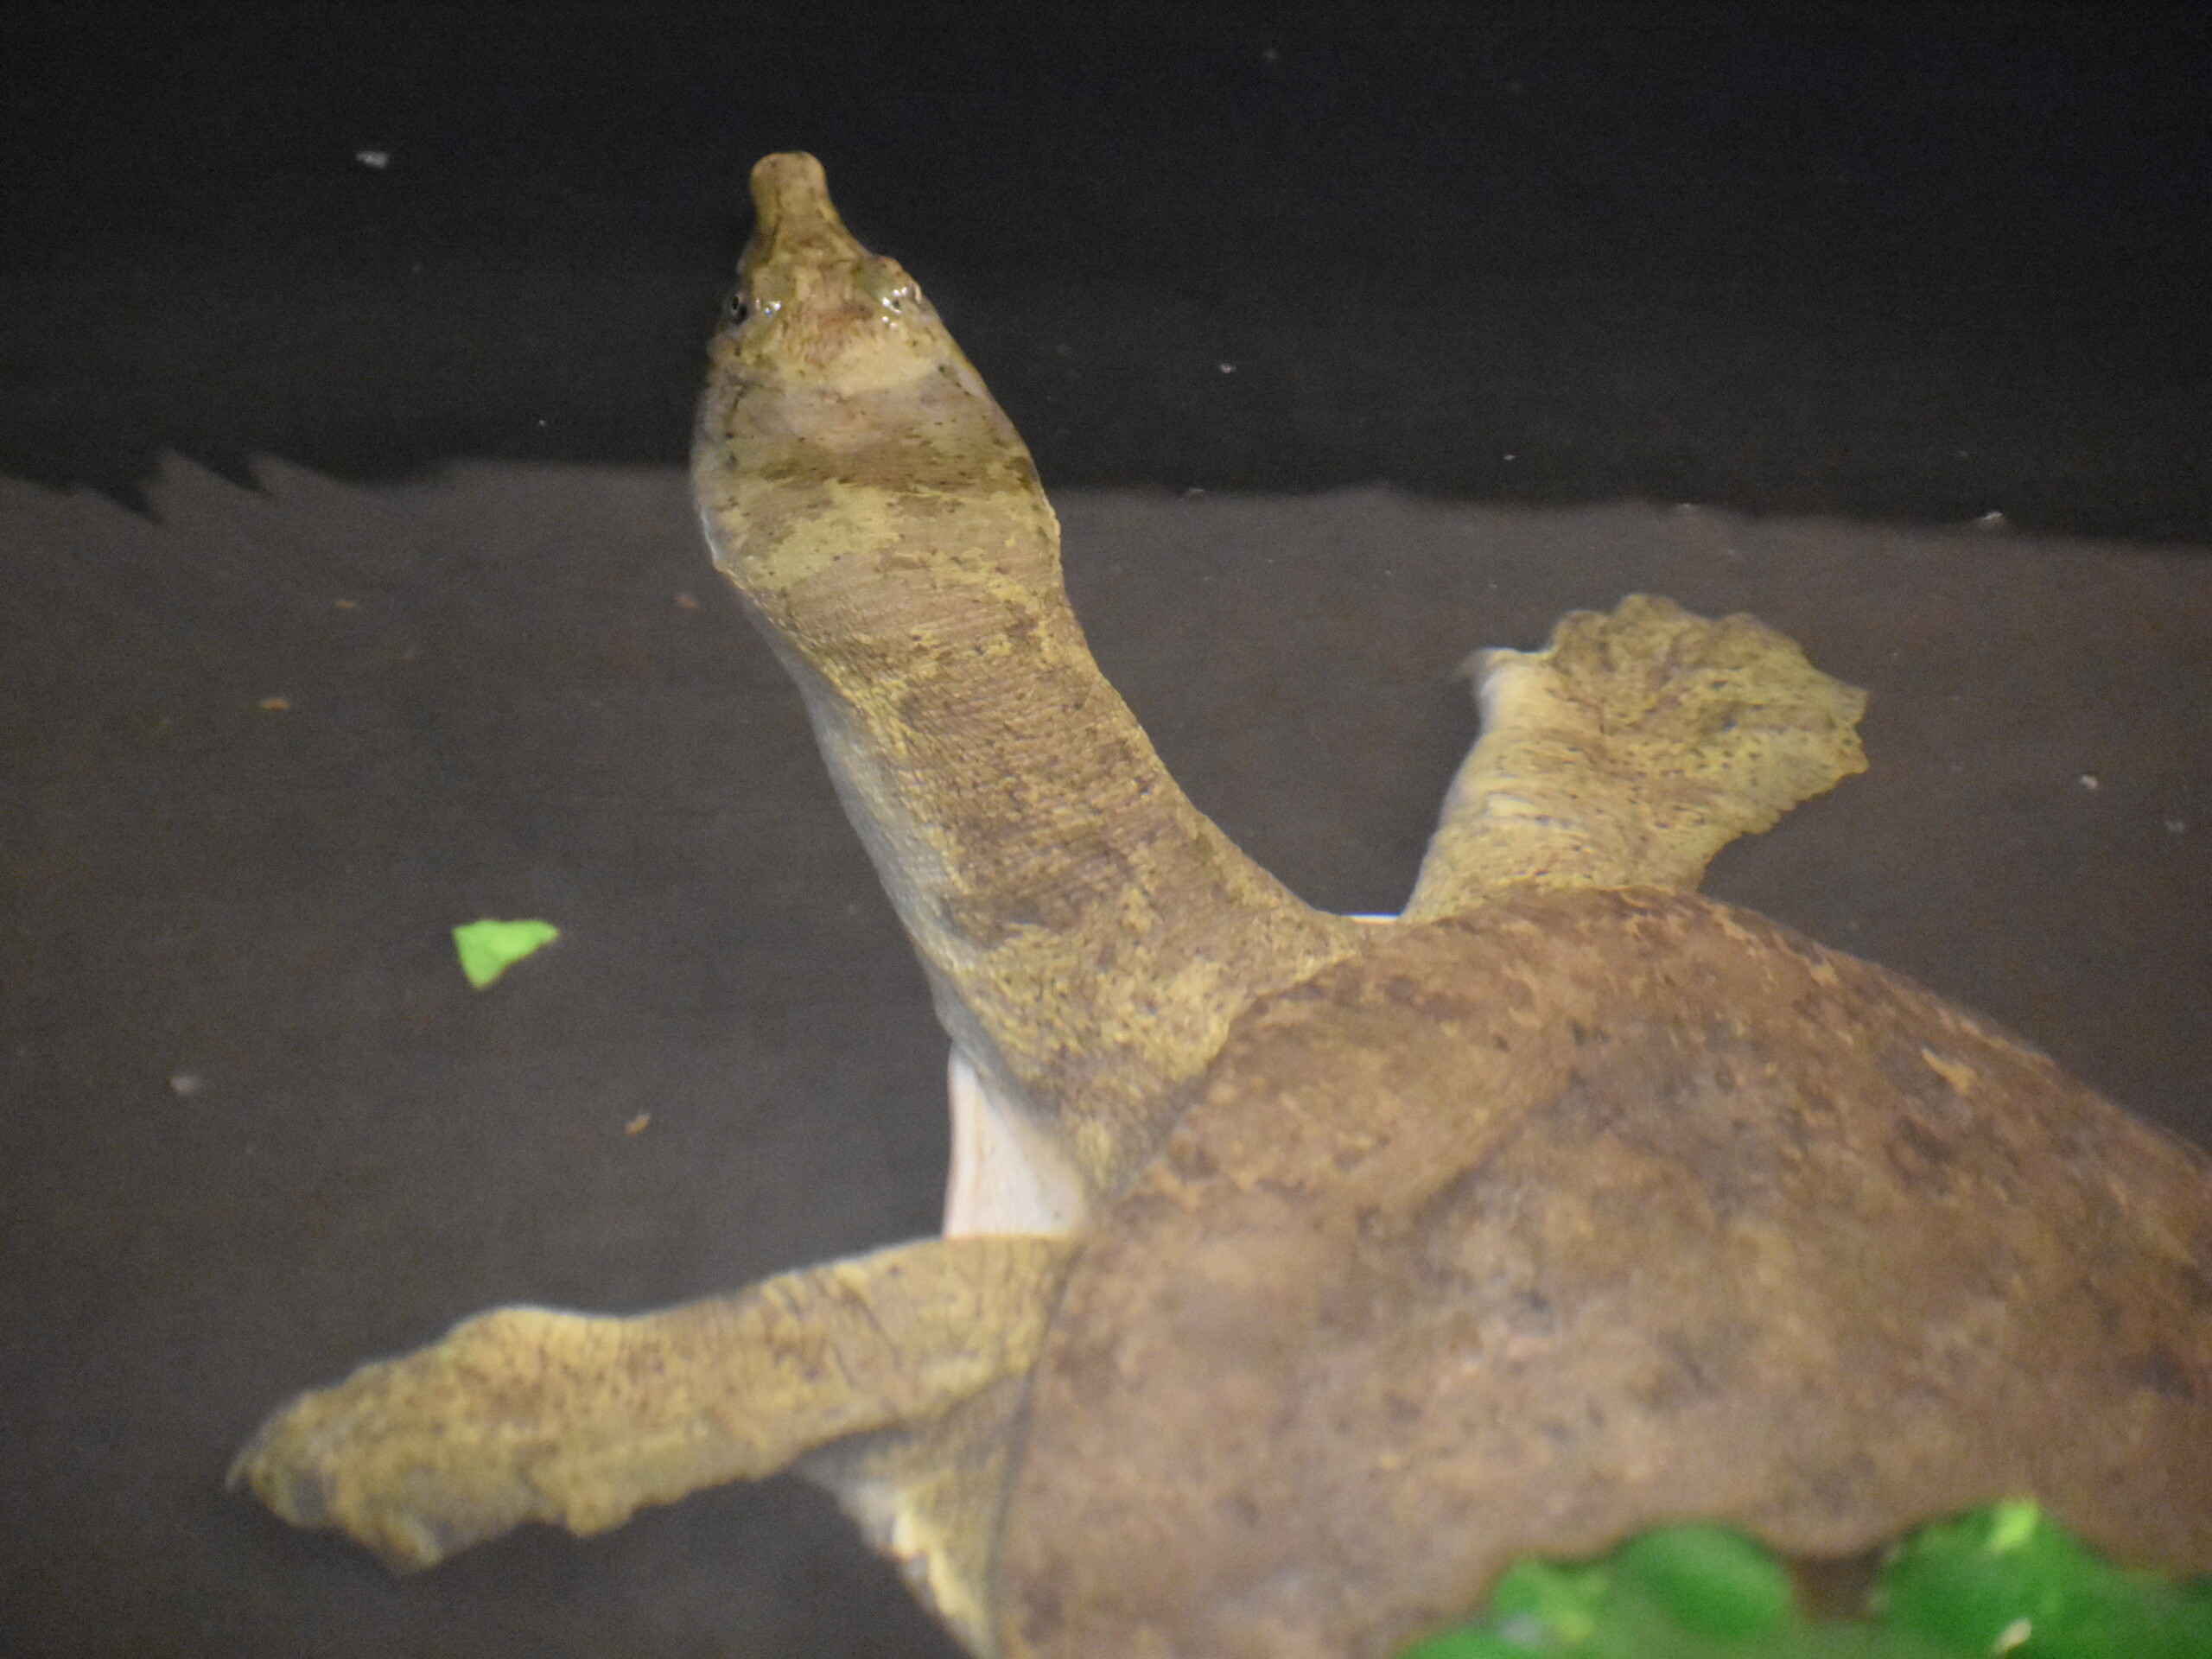 Hubertus the soft-shelled turtle in some leaves